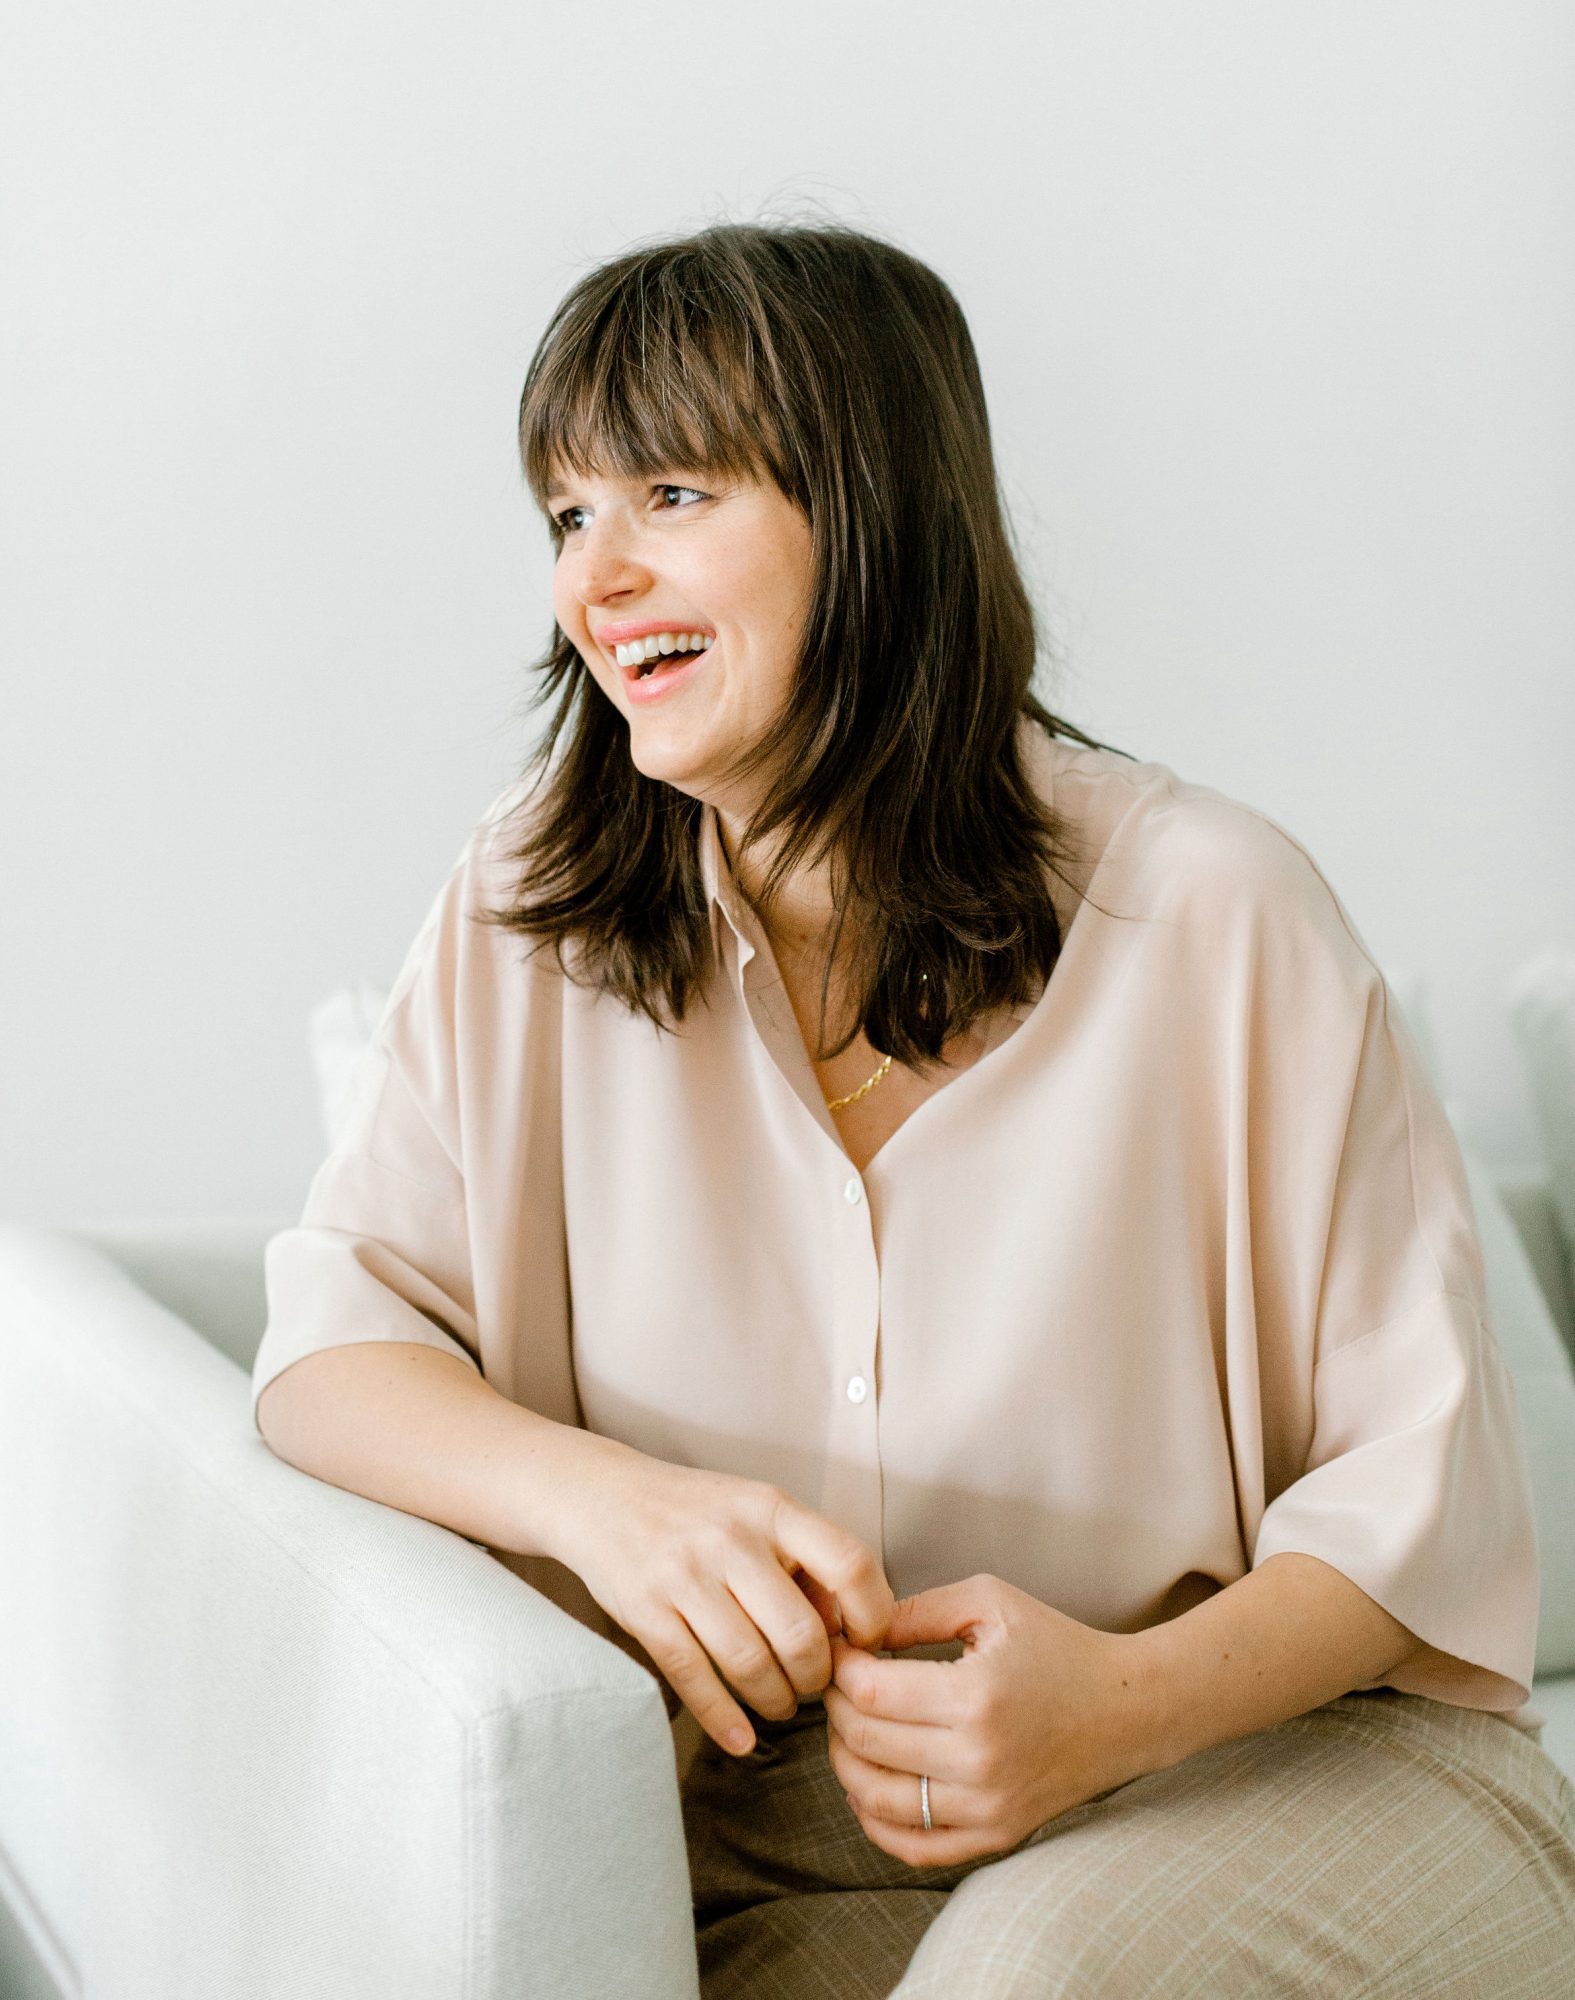 Barbora Samieian laughing and looking to the side wearing a blush pink blouse. She is leaning against a couch arm.